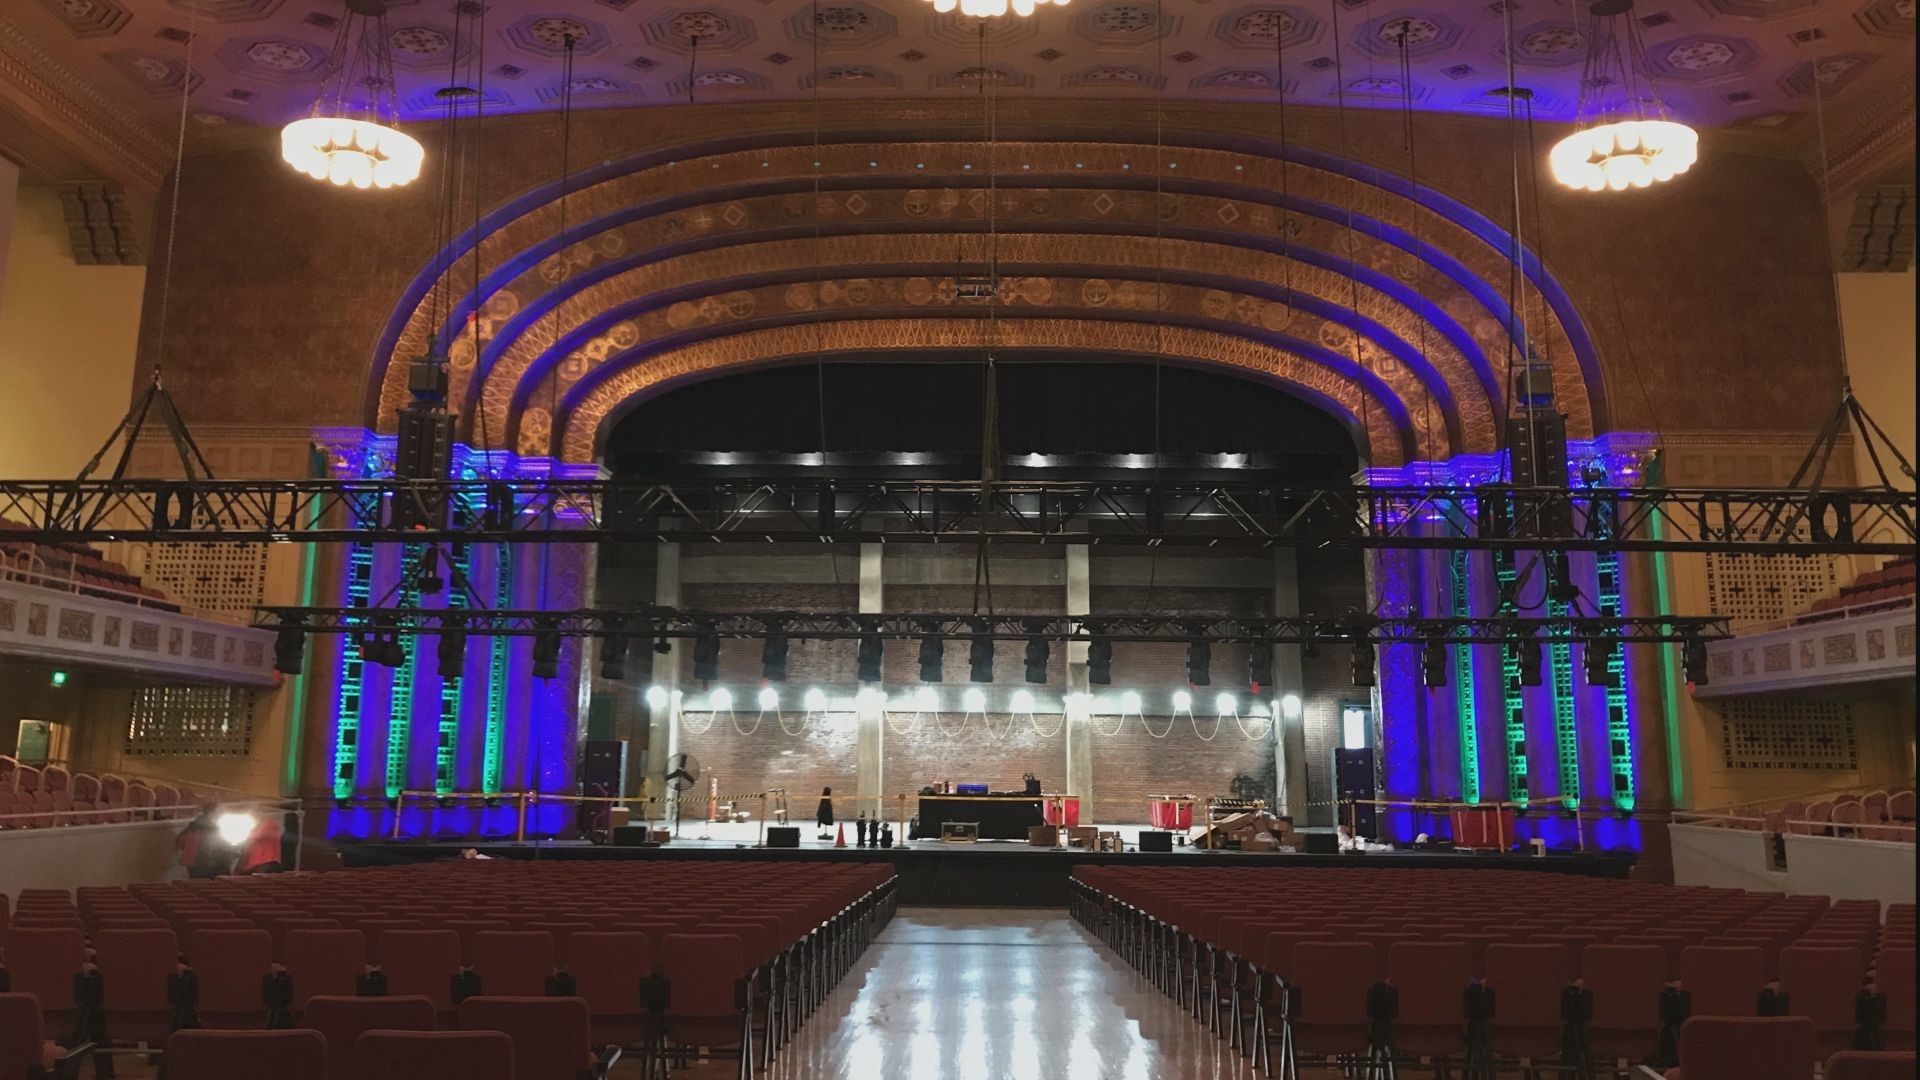 Sacramento's Memorial Auditorium is back open with improved lighting, sound and seating after nearly a year of renovations.